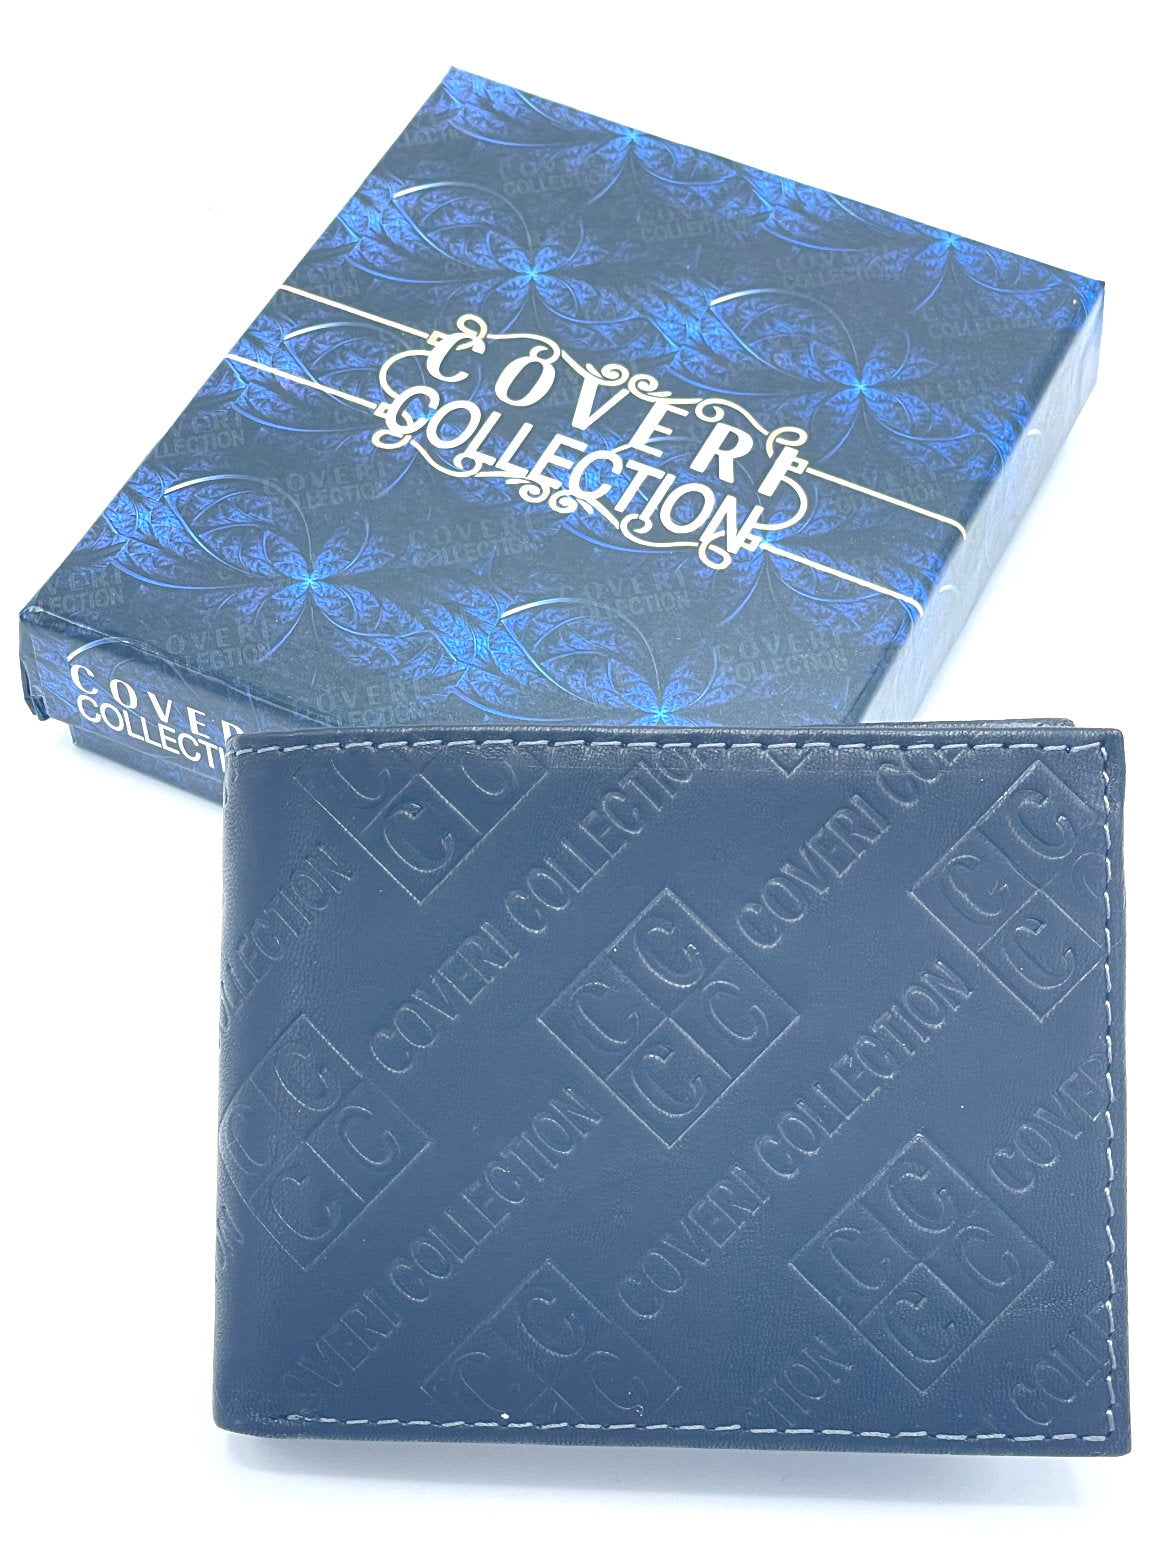 Genuine leather wallet for men, Brand Coveri Collection, art. 515992.335